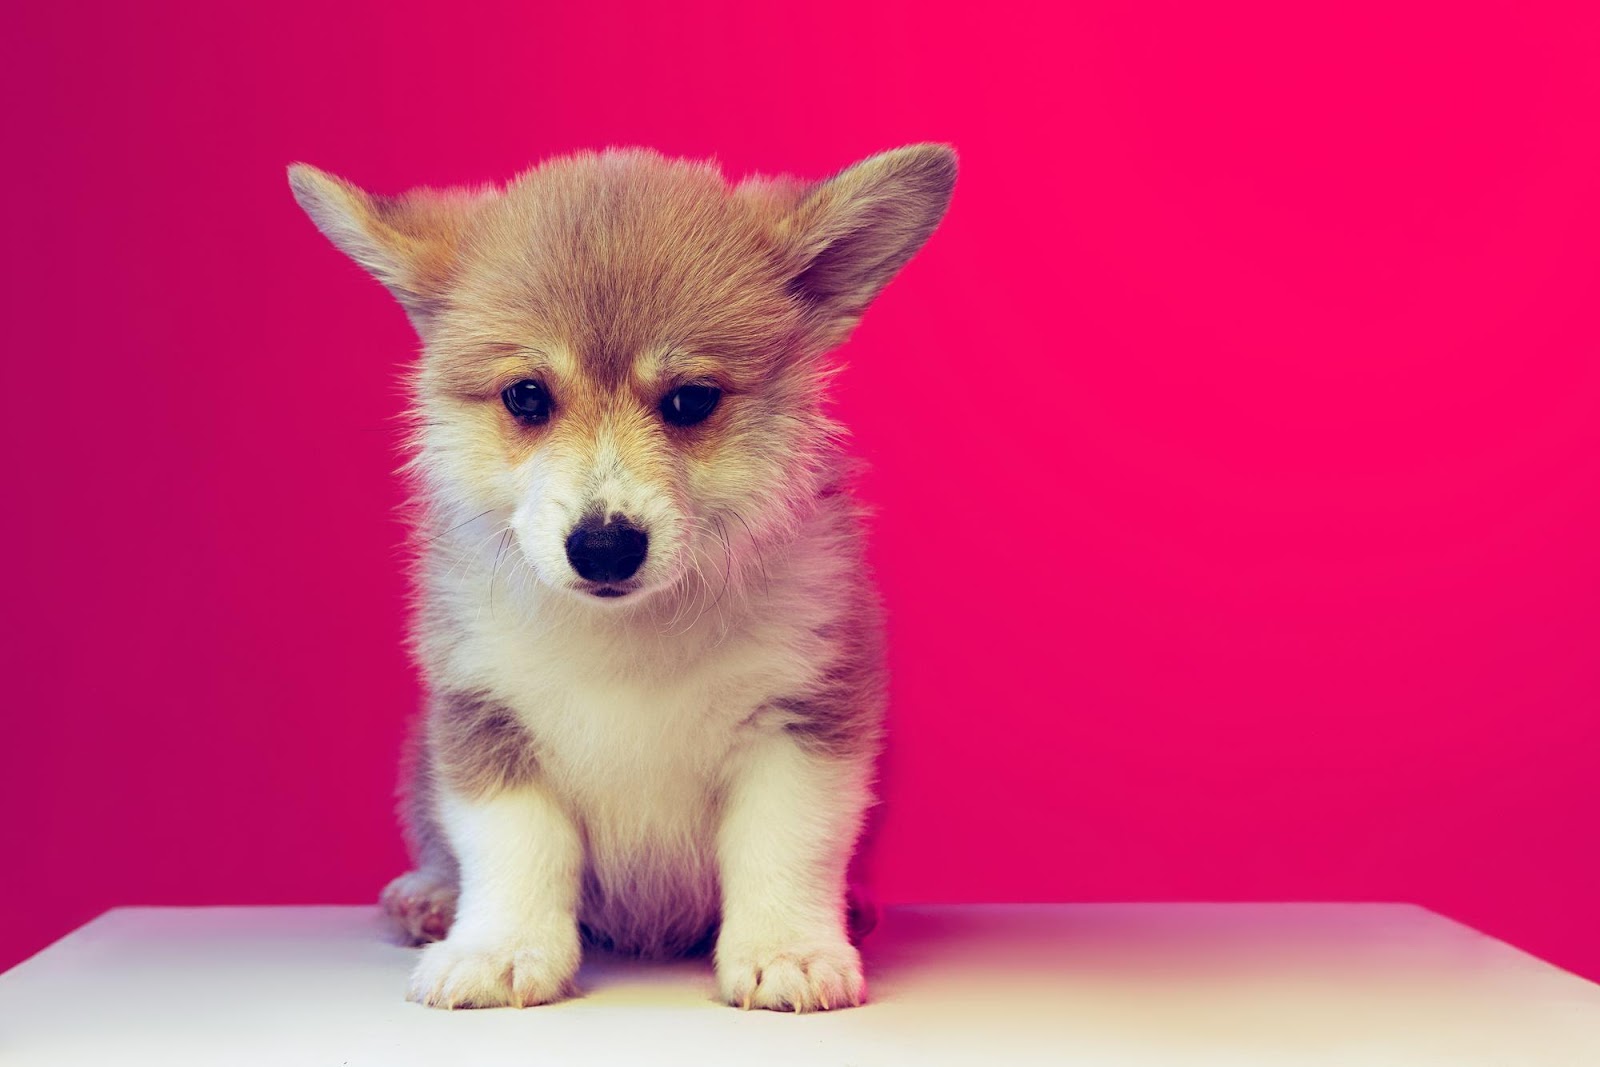 The Rise of Puppy Cams: How Tech Innovations are Shaping Our Interactions  with Pets